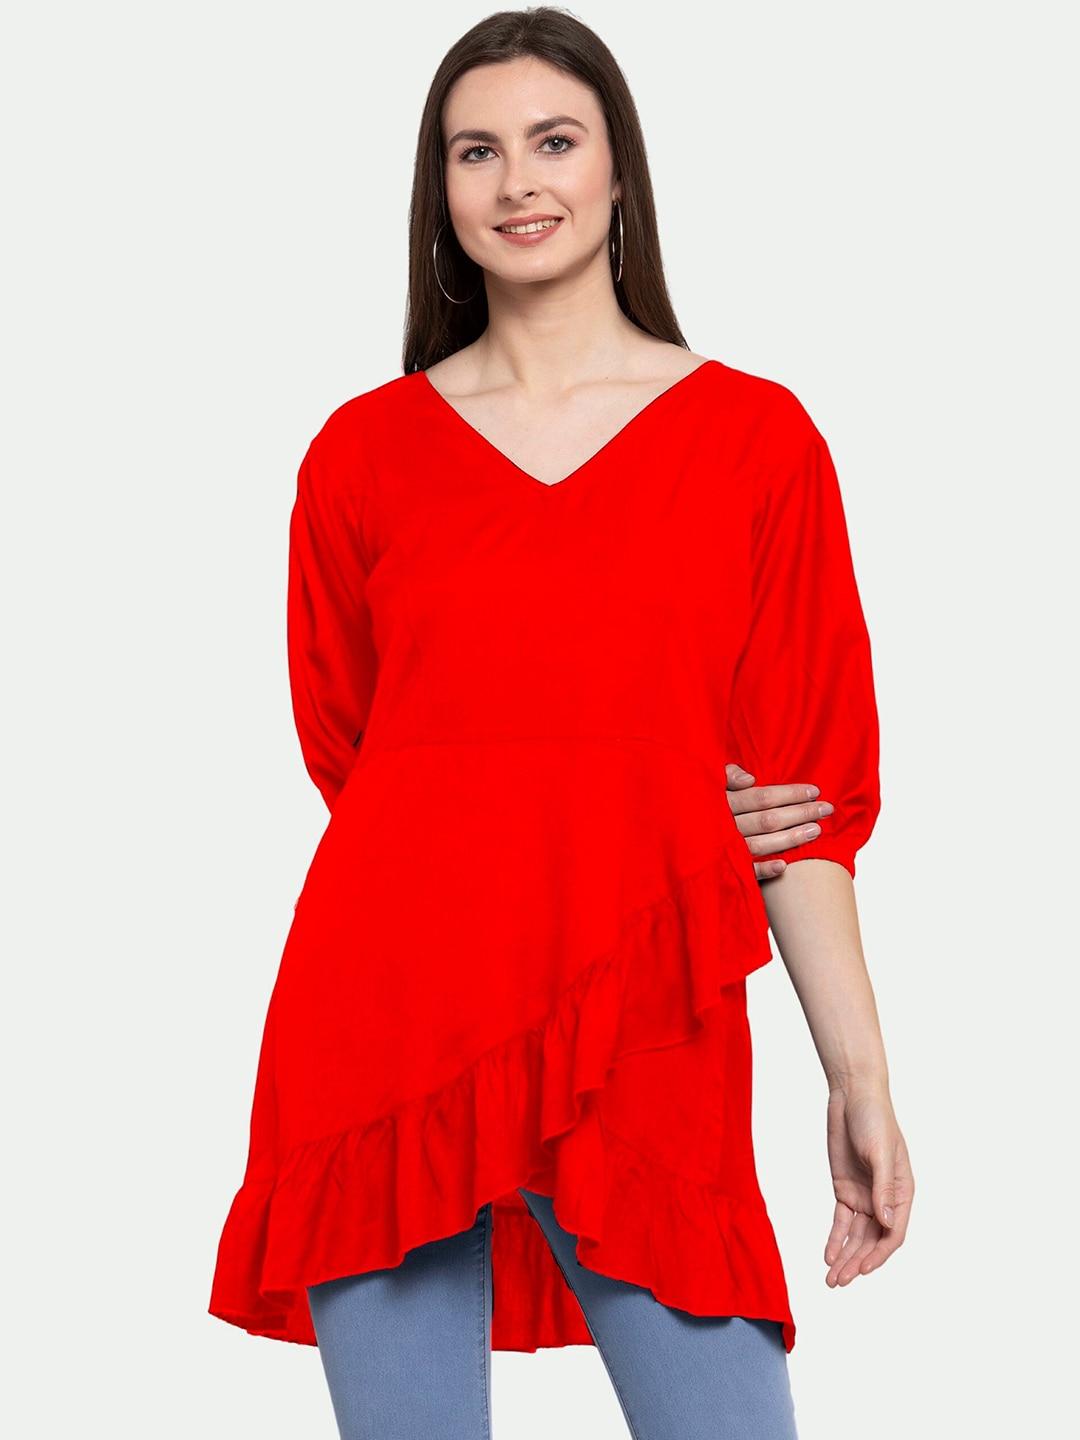 patrorna-women-red-solid-batwing-sleeves-layered-wrap-longline-top